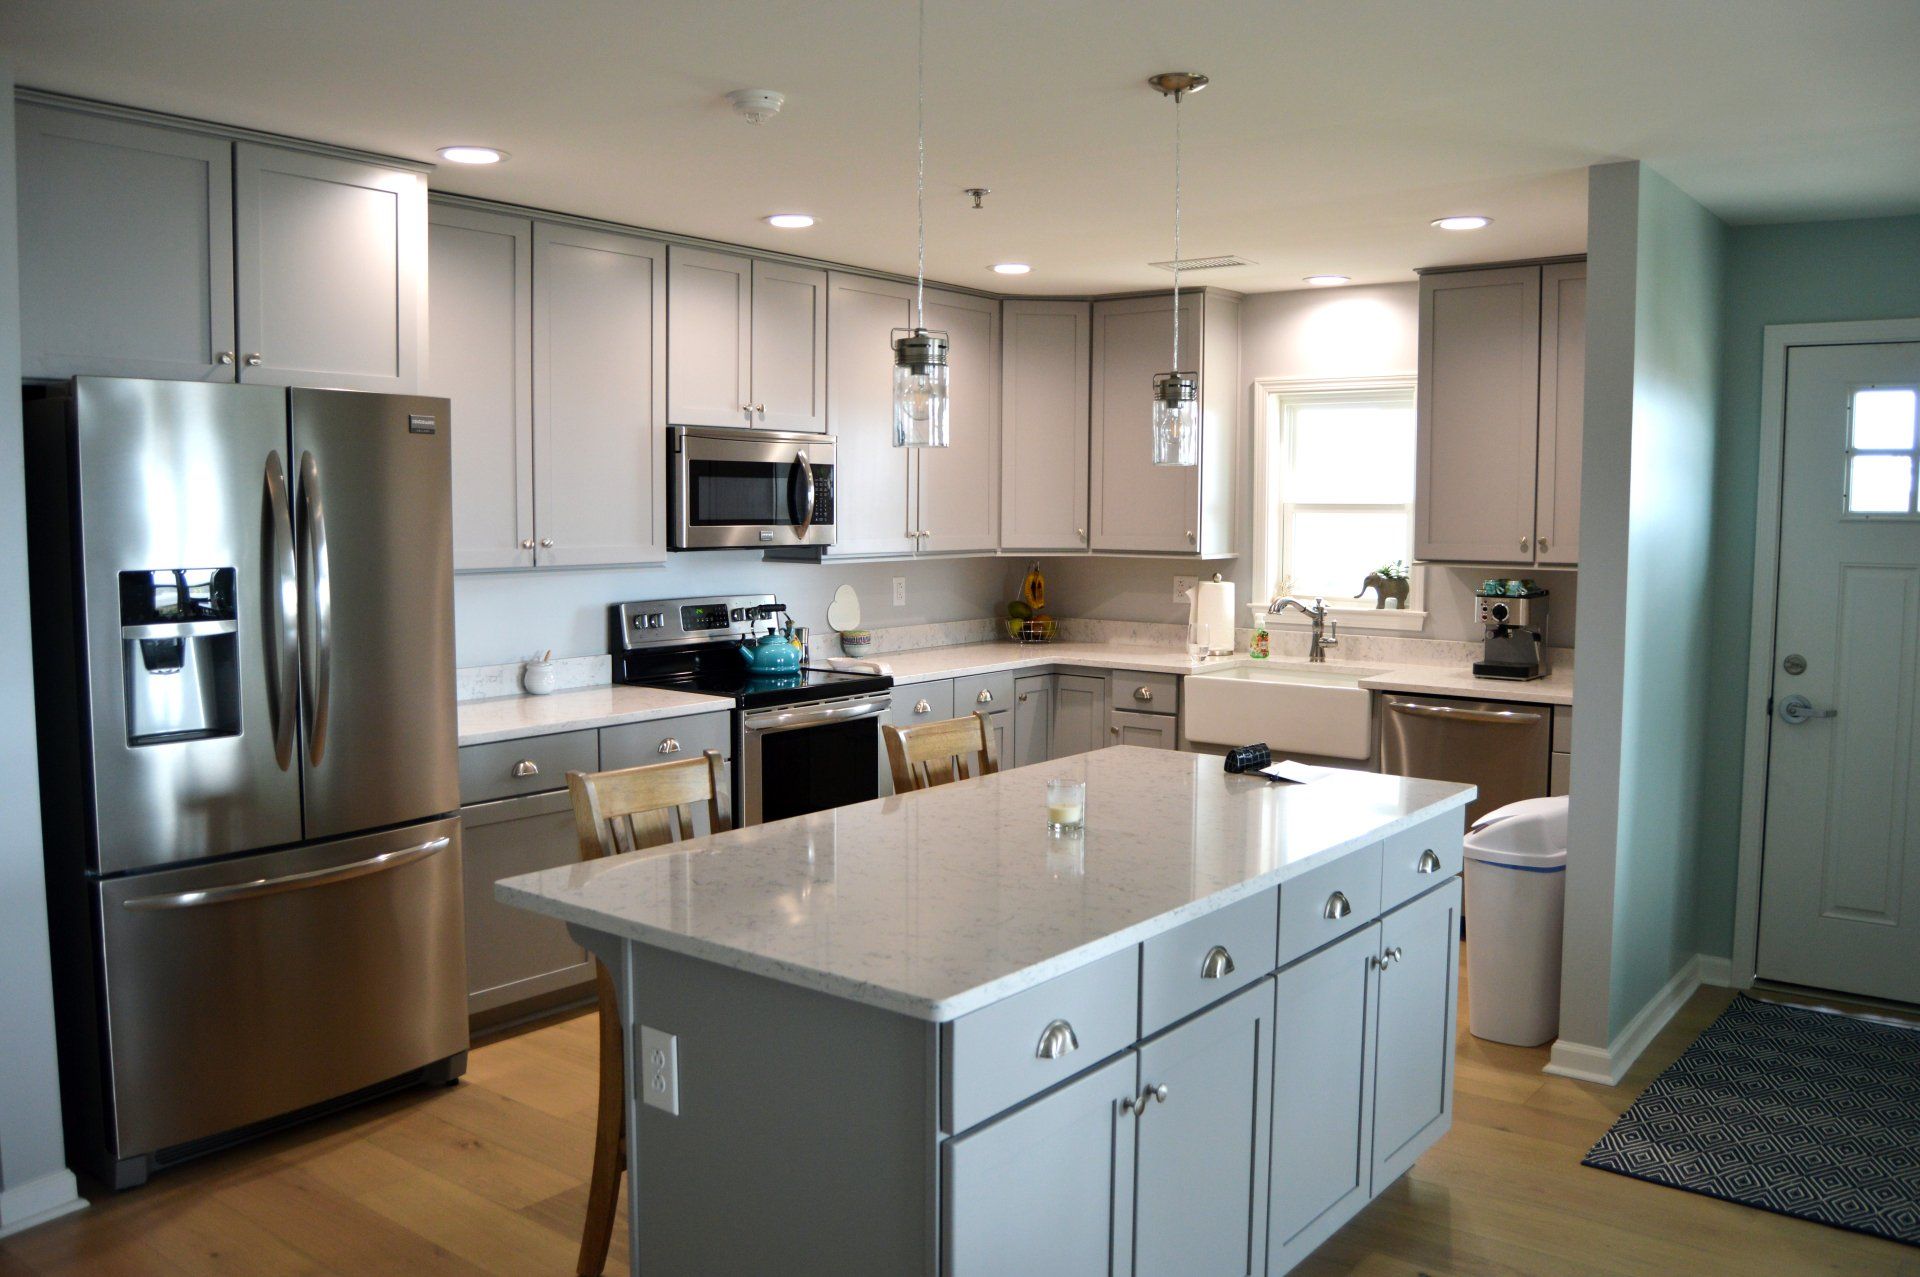 a kitchen with white cabinets , stainless steel appliances , and a large island in the middle .